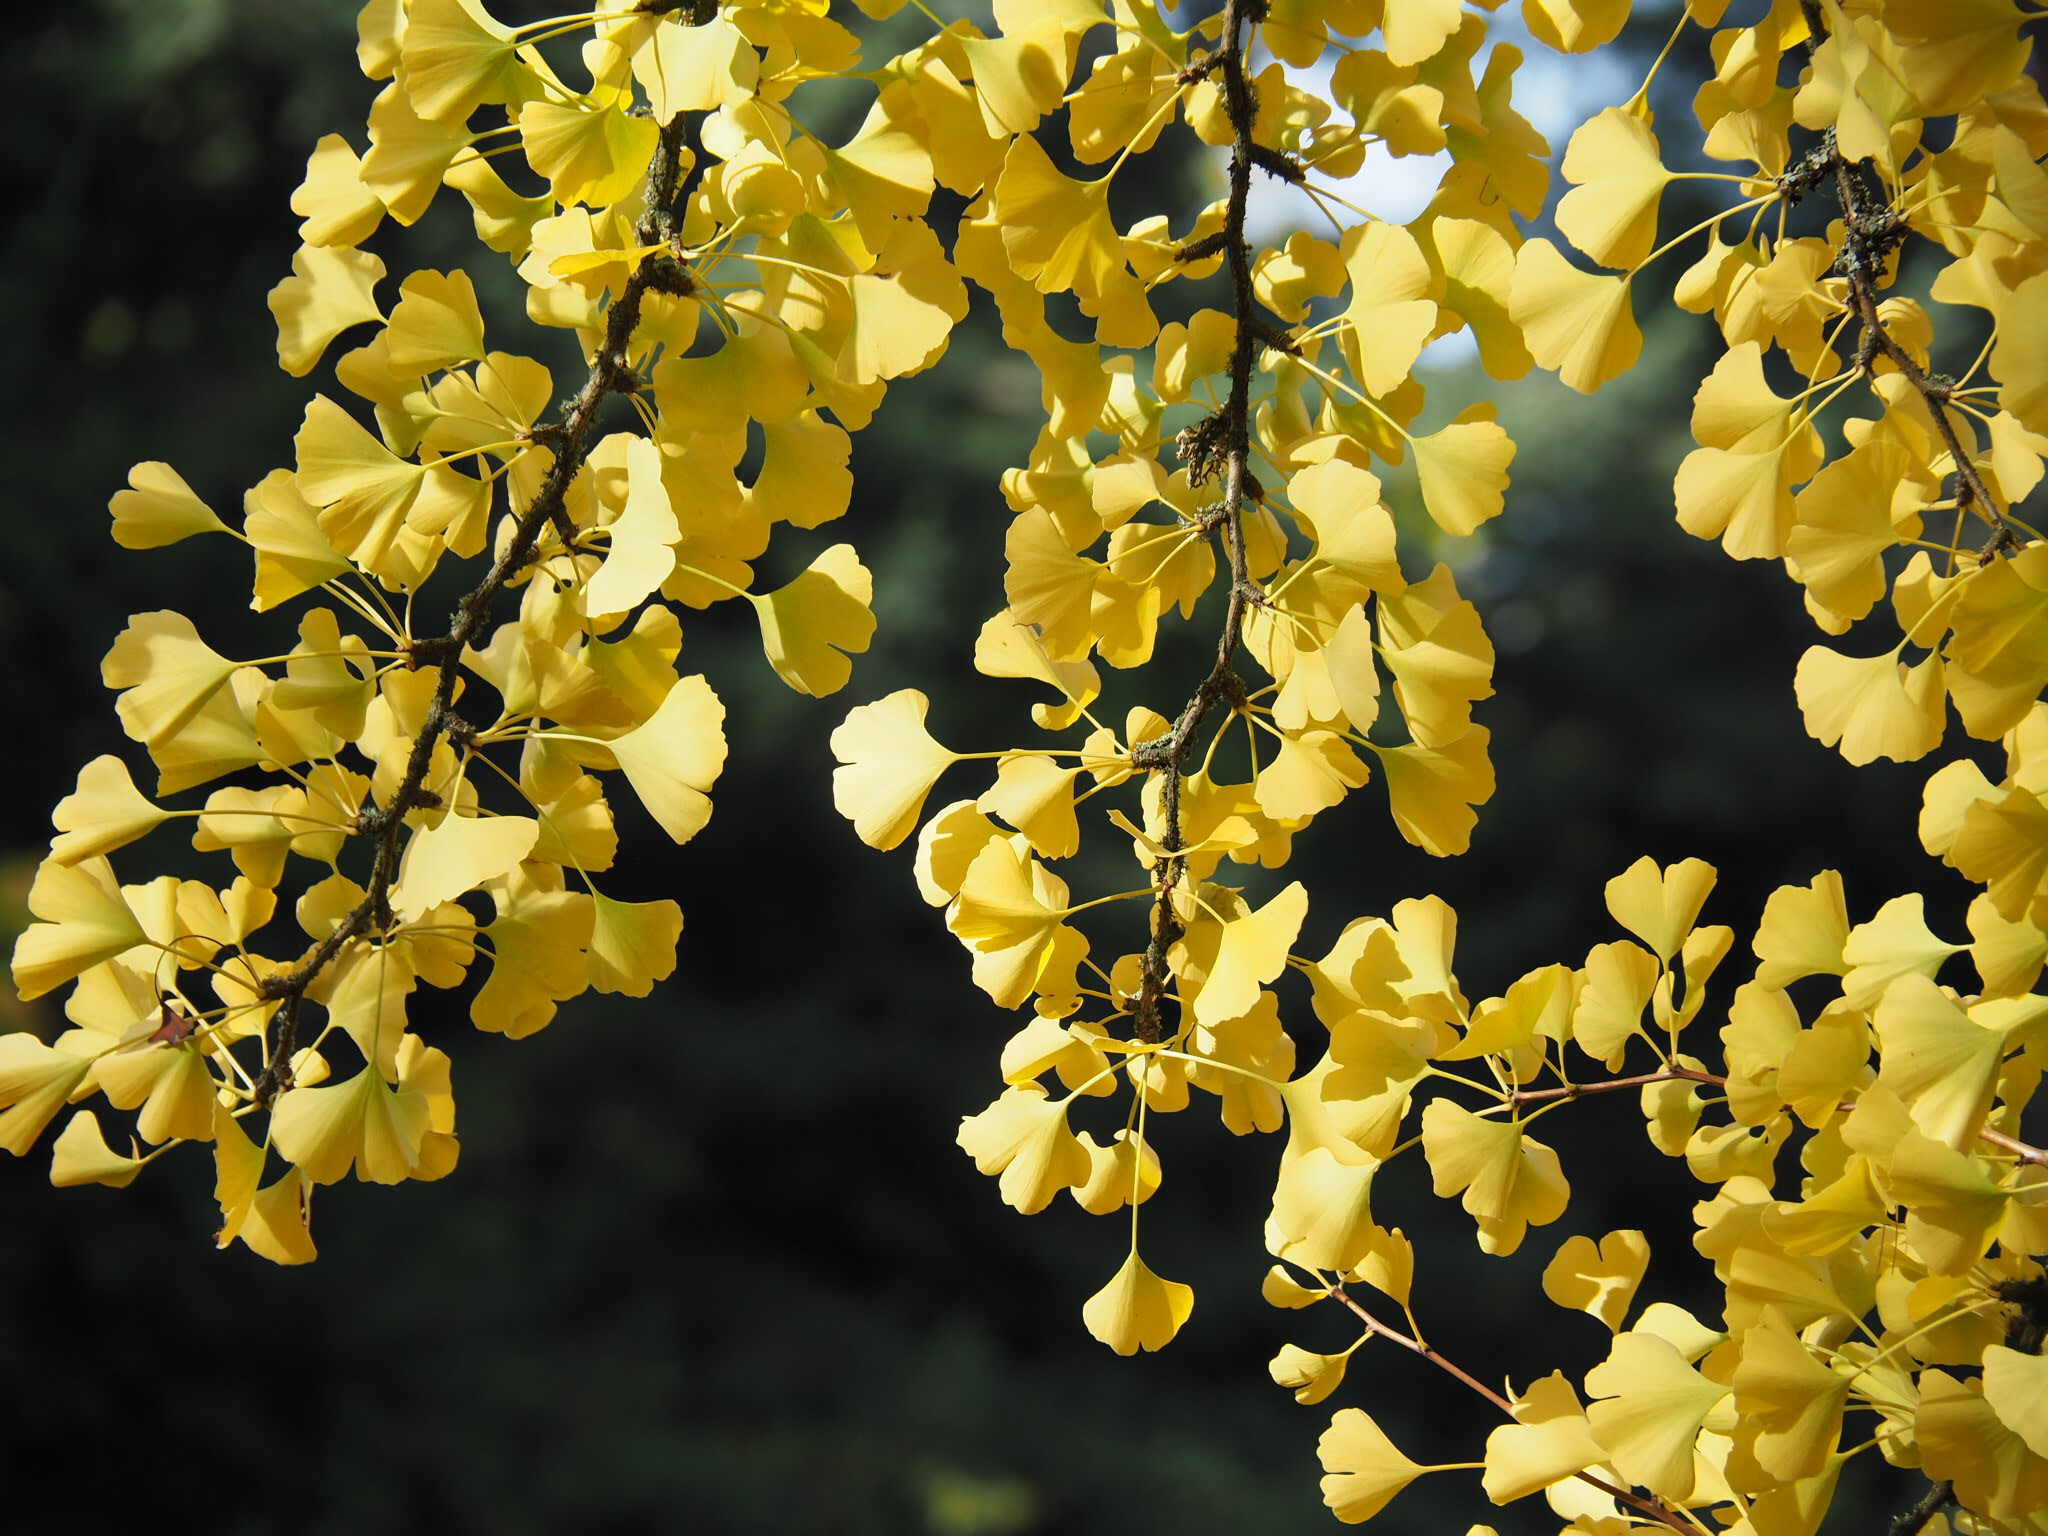 Ginkgo's Story, Part Two: A Tree Renowned for Its Beauty